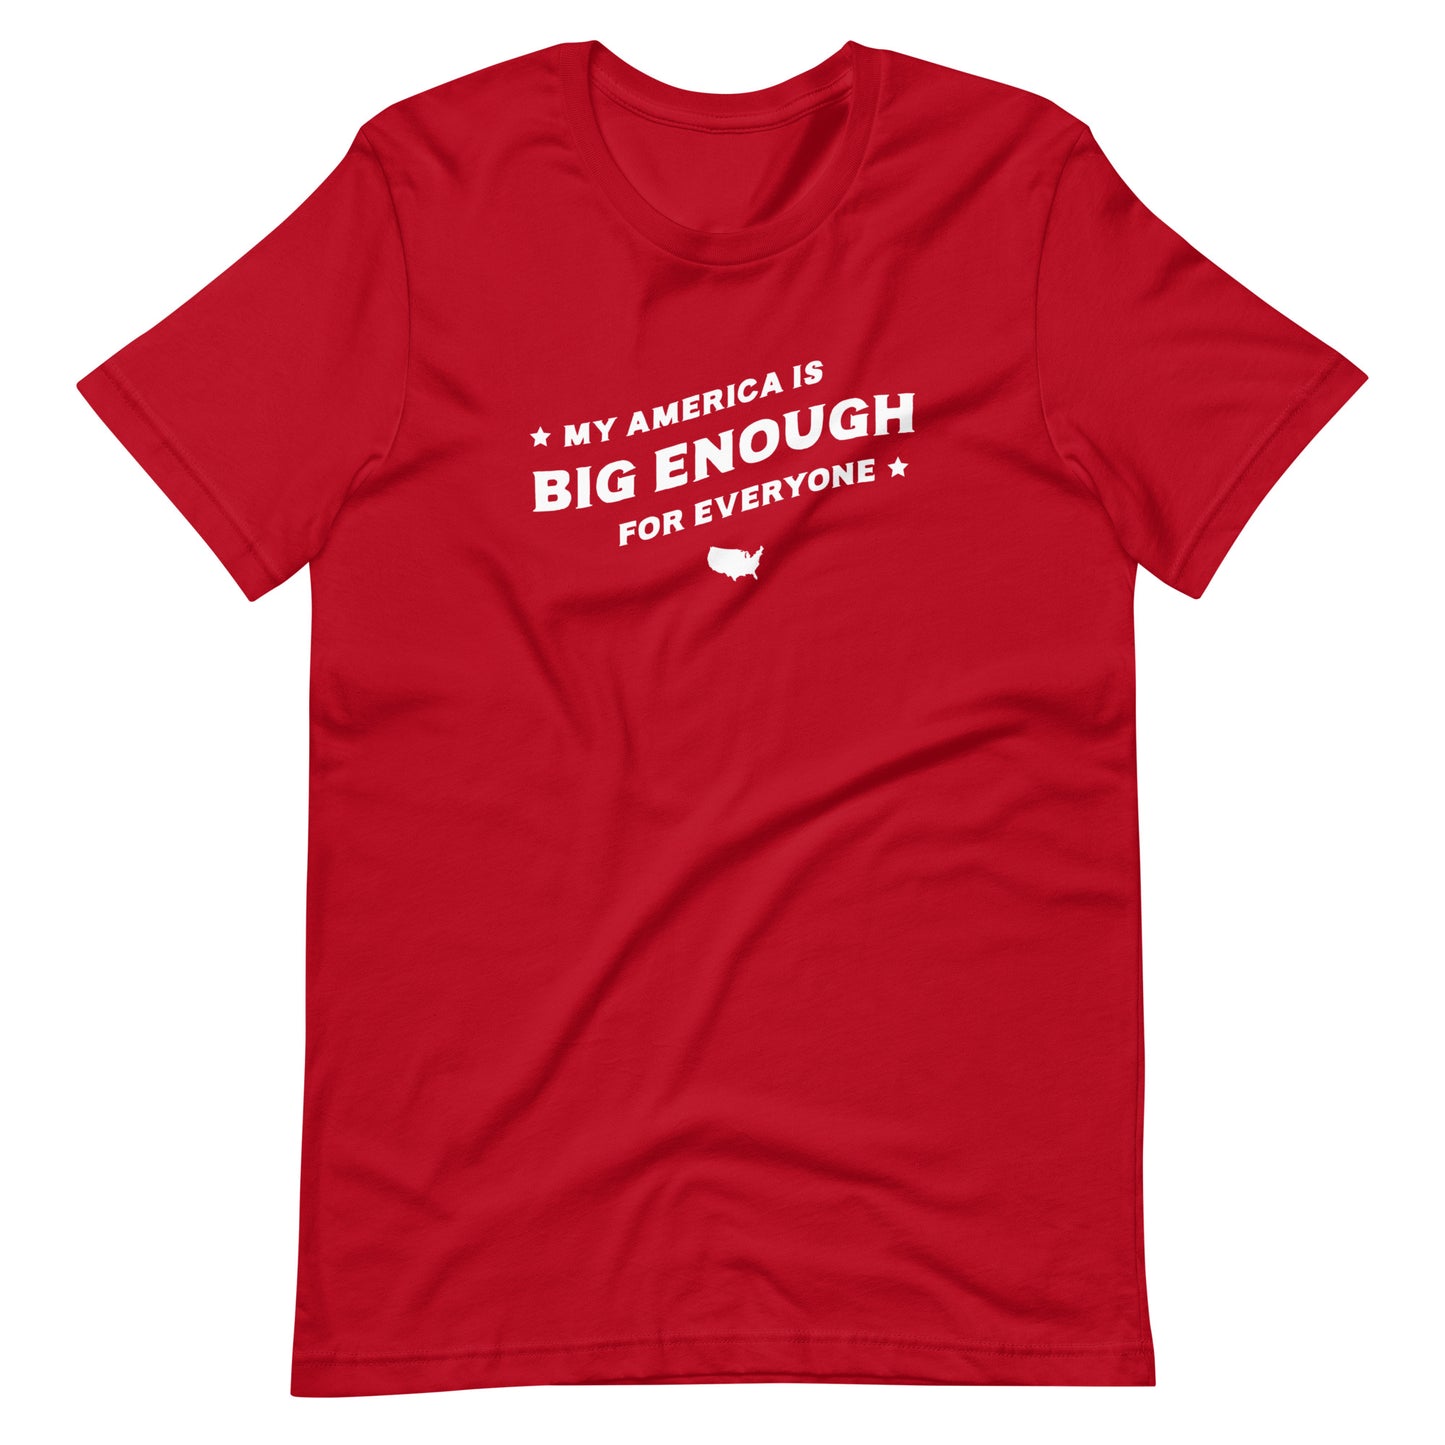 My America is Big Enough for Everyone - Men’s/Unisex Tee